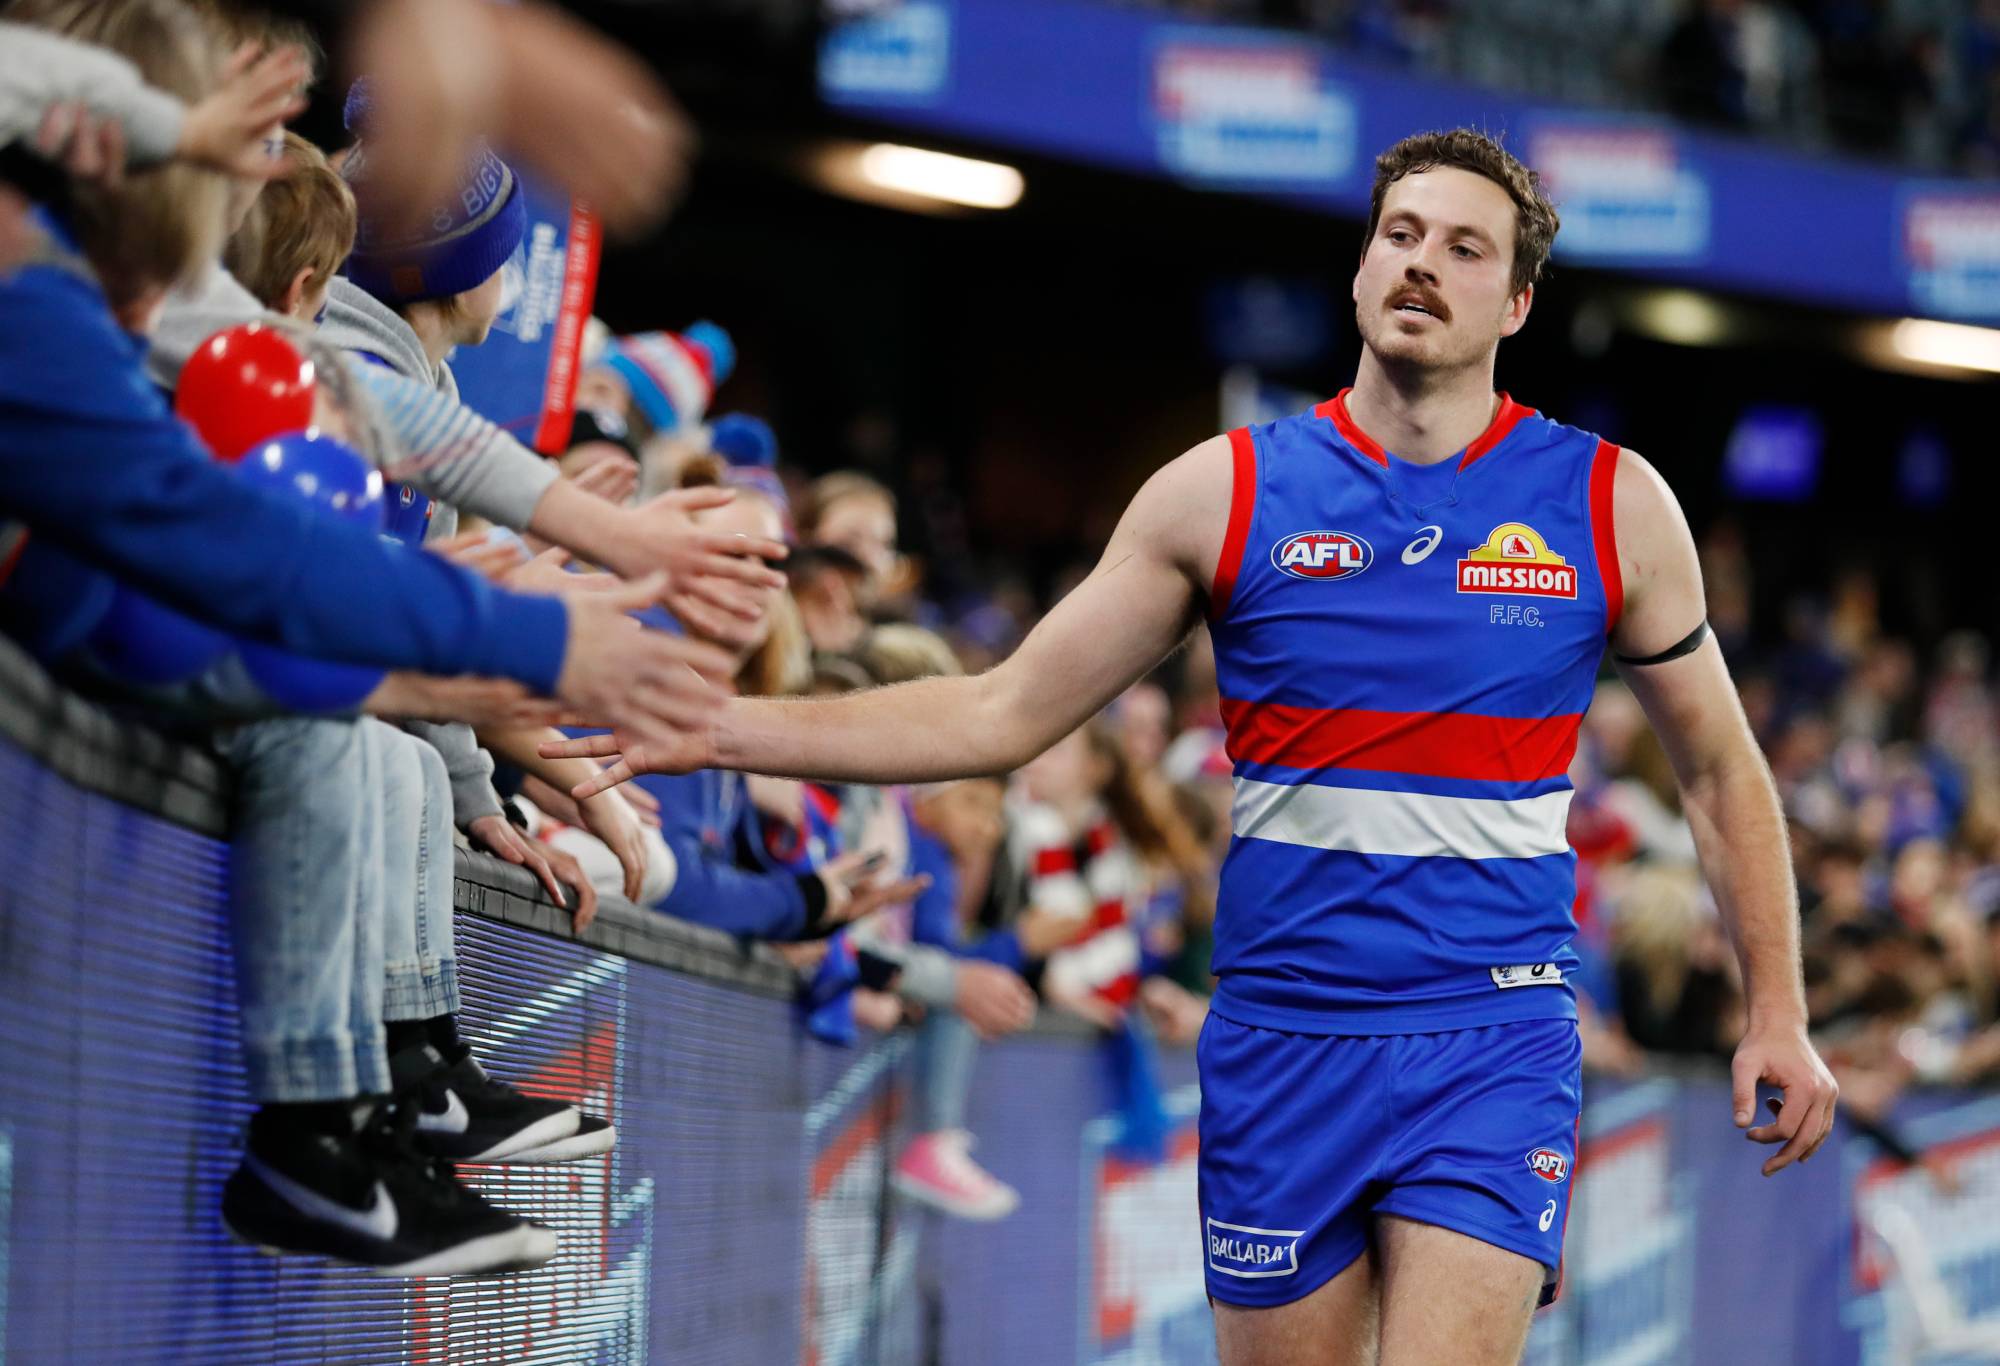 MELBOURNE, AUSTRALIA - AUGUST 13: Zaine Cordy of the Bulldogs celebrates with fans during the 2022 AFL Round 22 match between the Western Bulldogs and the GWS Giants at Marvel Stadium on August 13, 2022 in Melbourne, Australia. (Photo by Dylan Burns/AFL Photos via Getty Images)